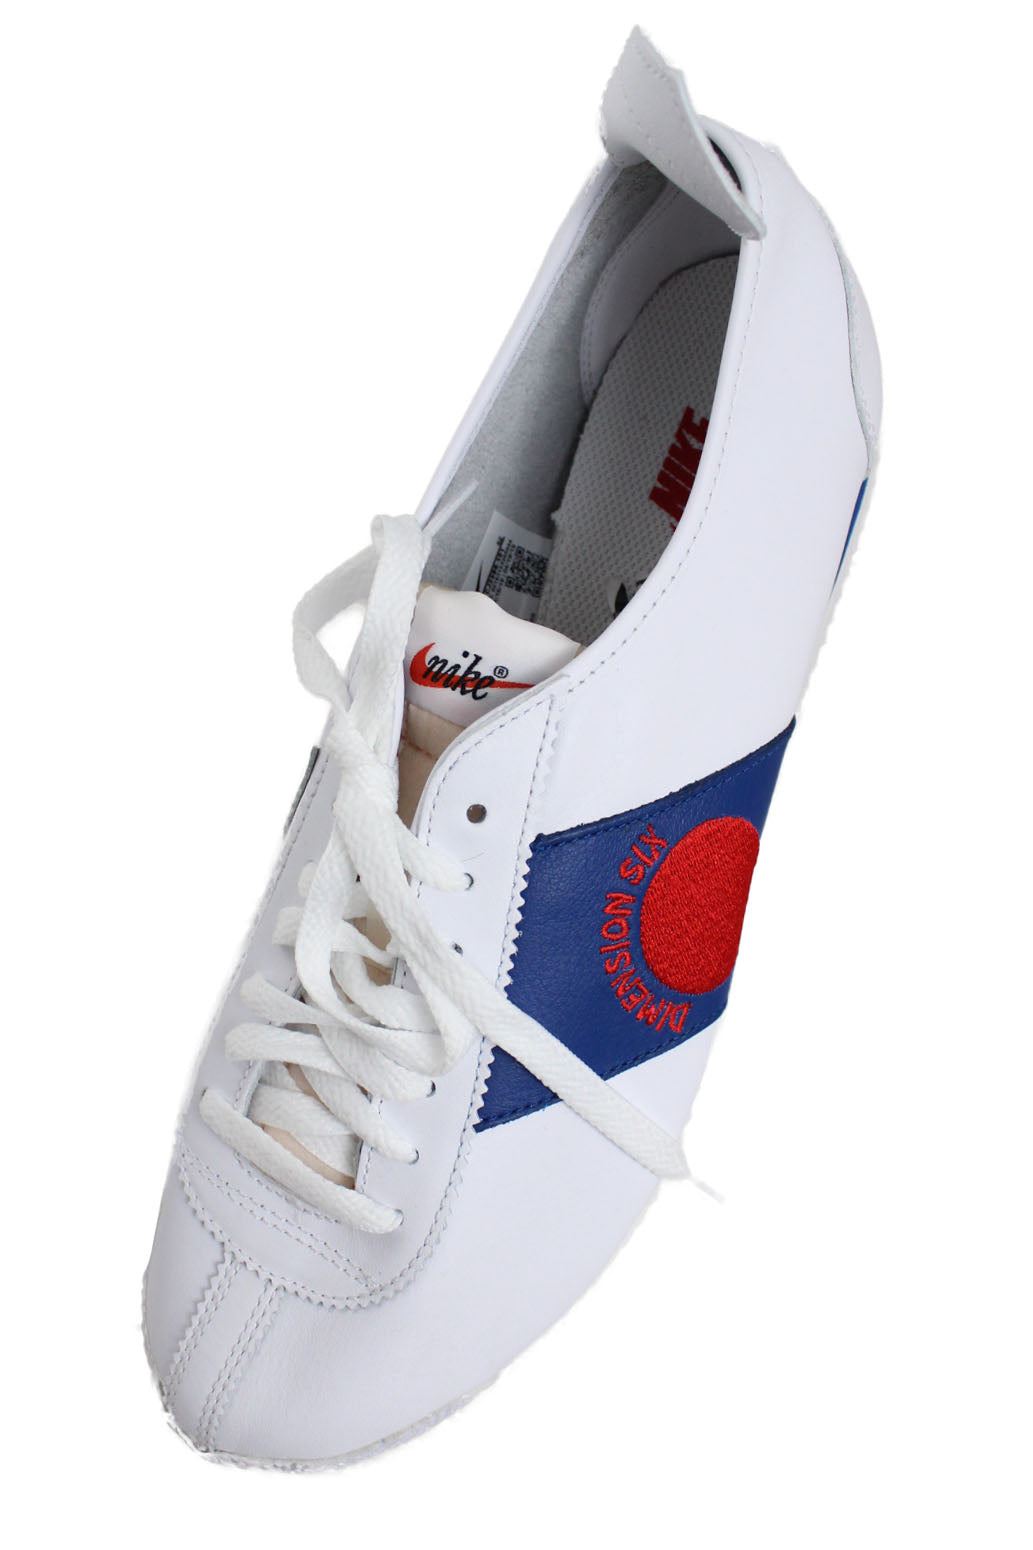 top view with 'nike' logo tongue tag, and 'division six' logo embroidered at outer side of shoes.